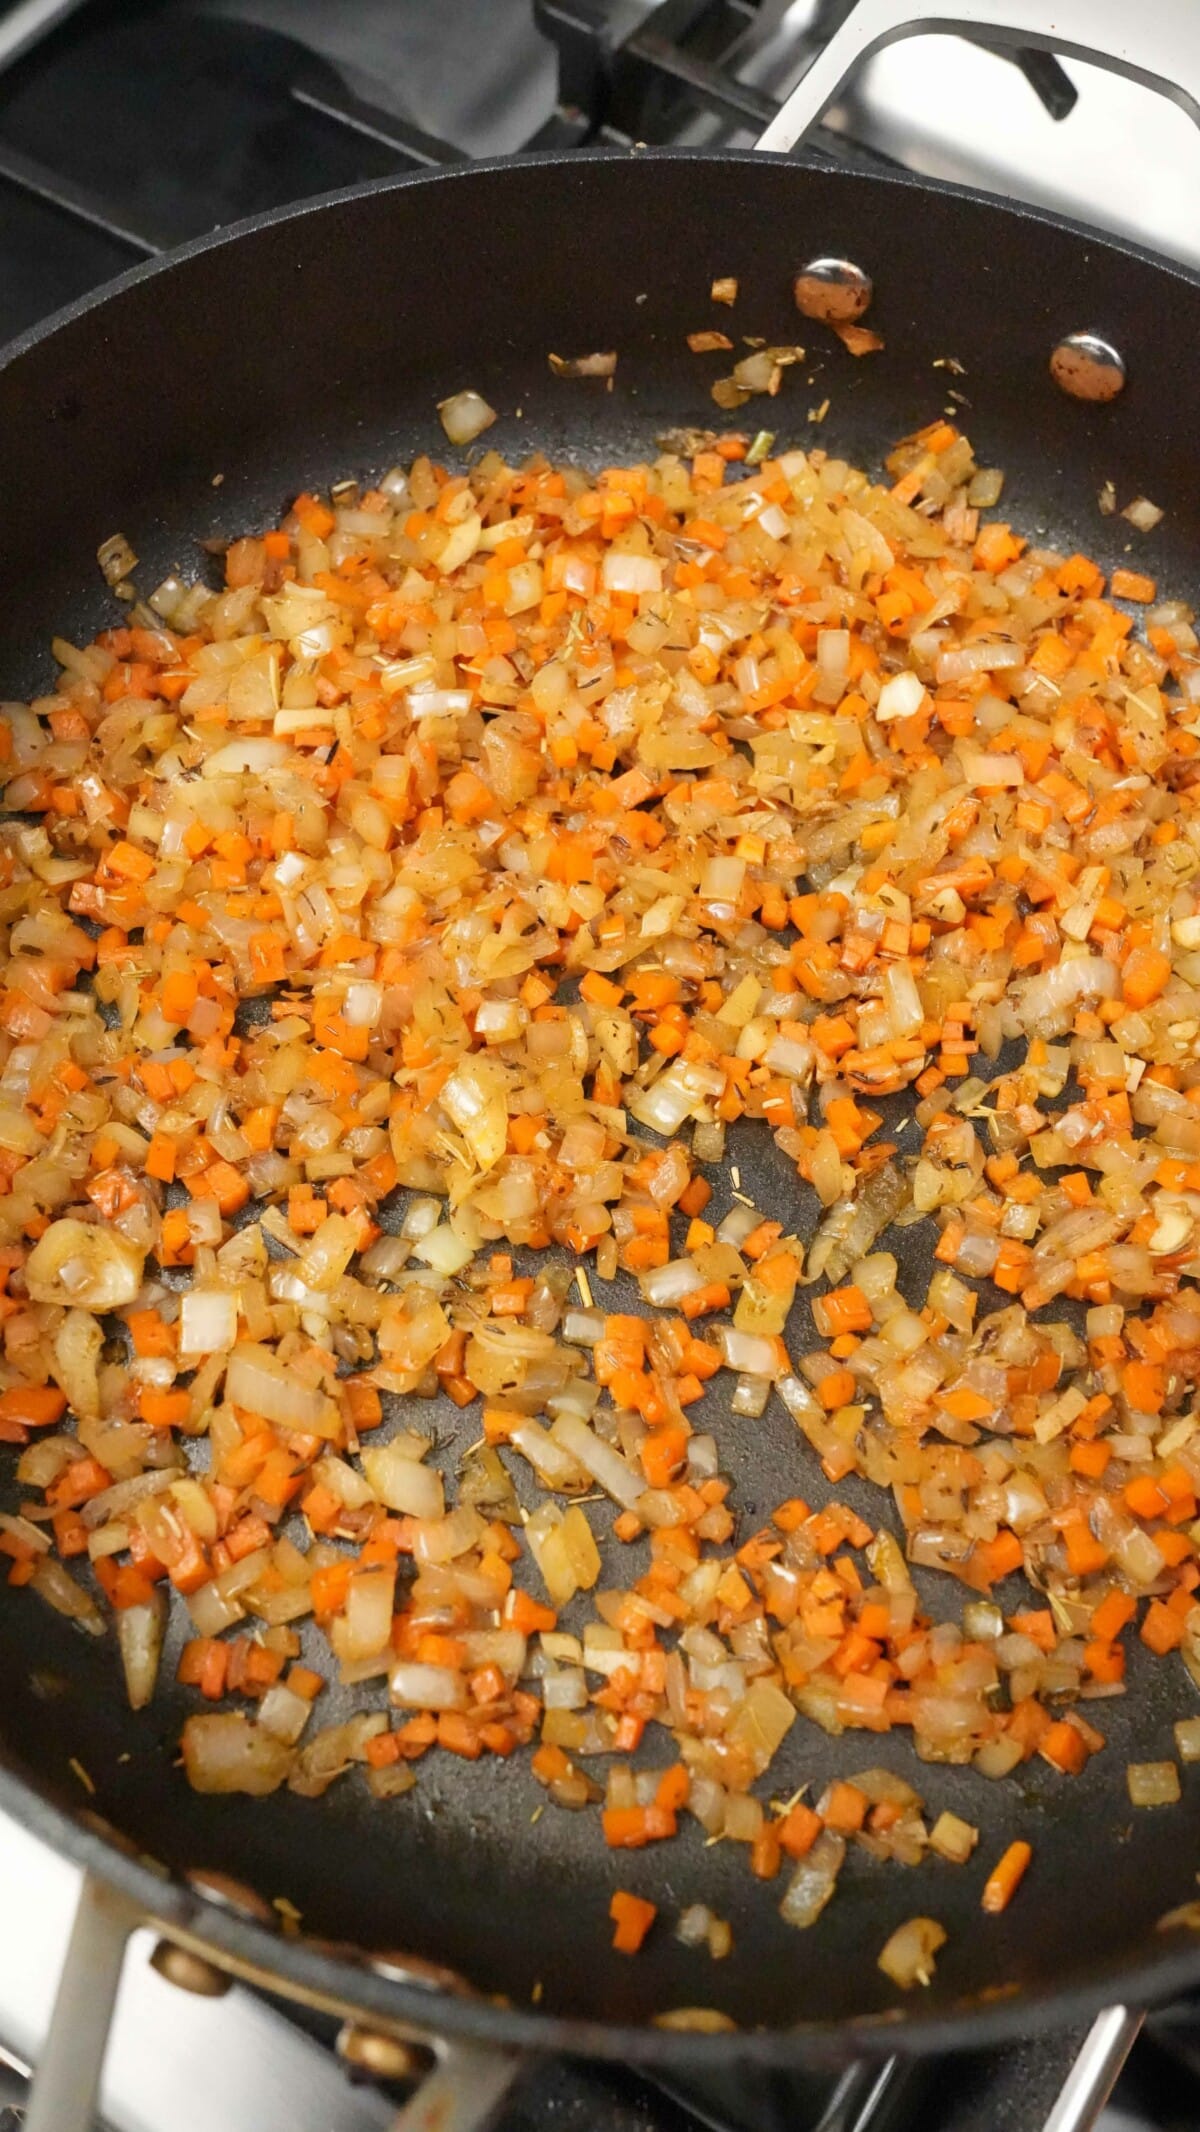 Onions, carrots, garlic and spices cooked in a pan.